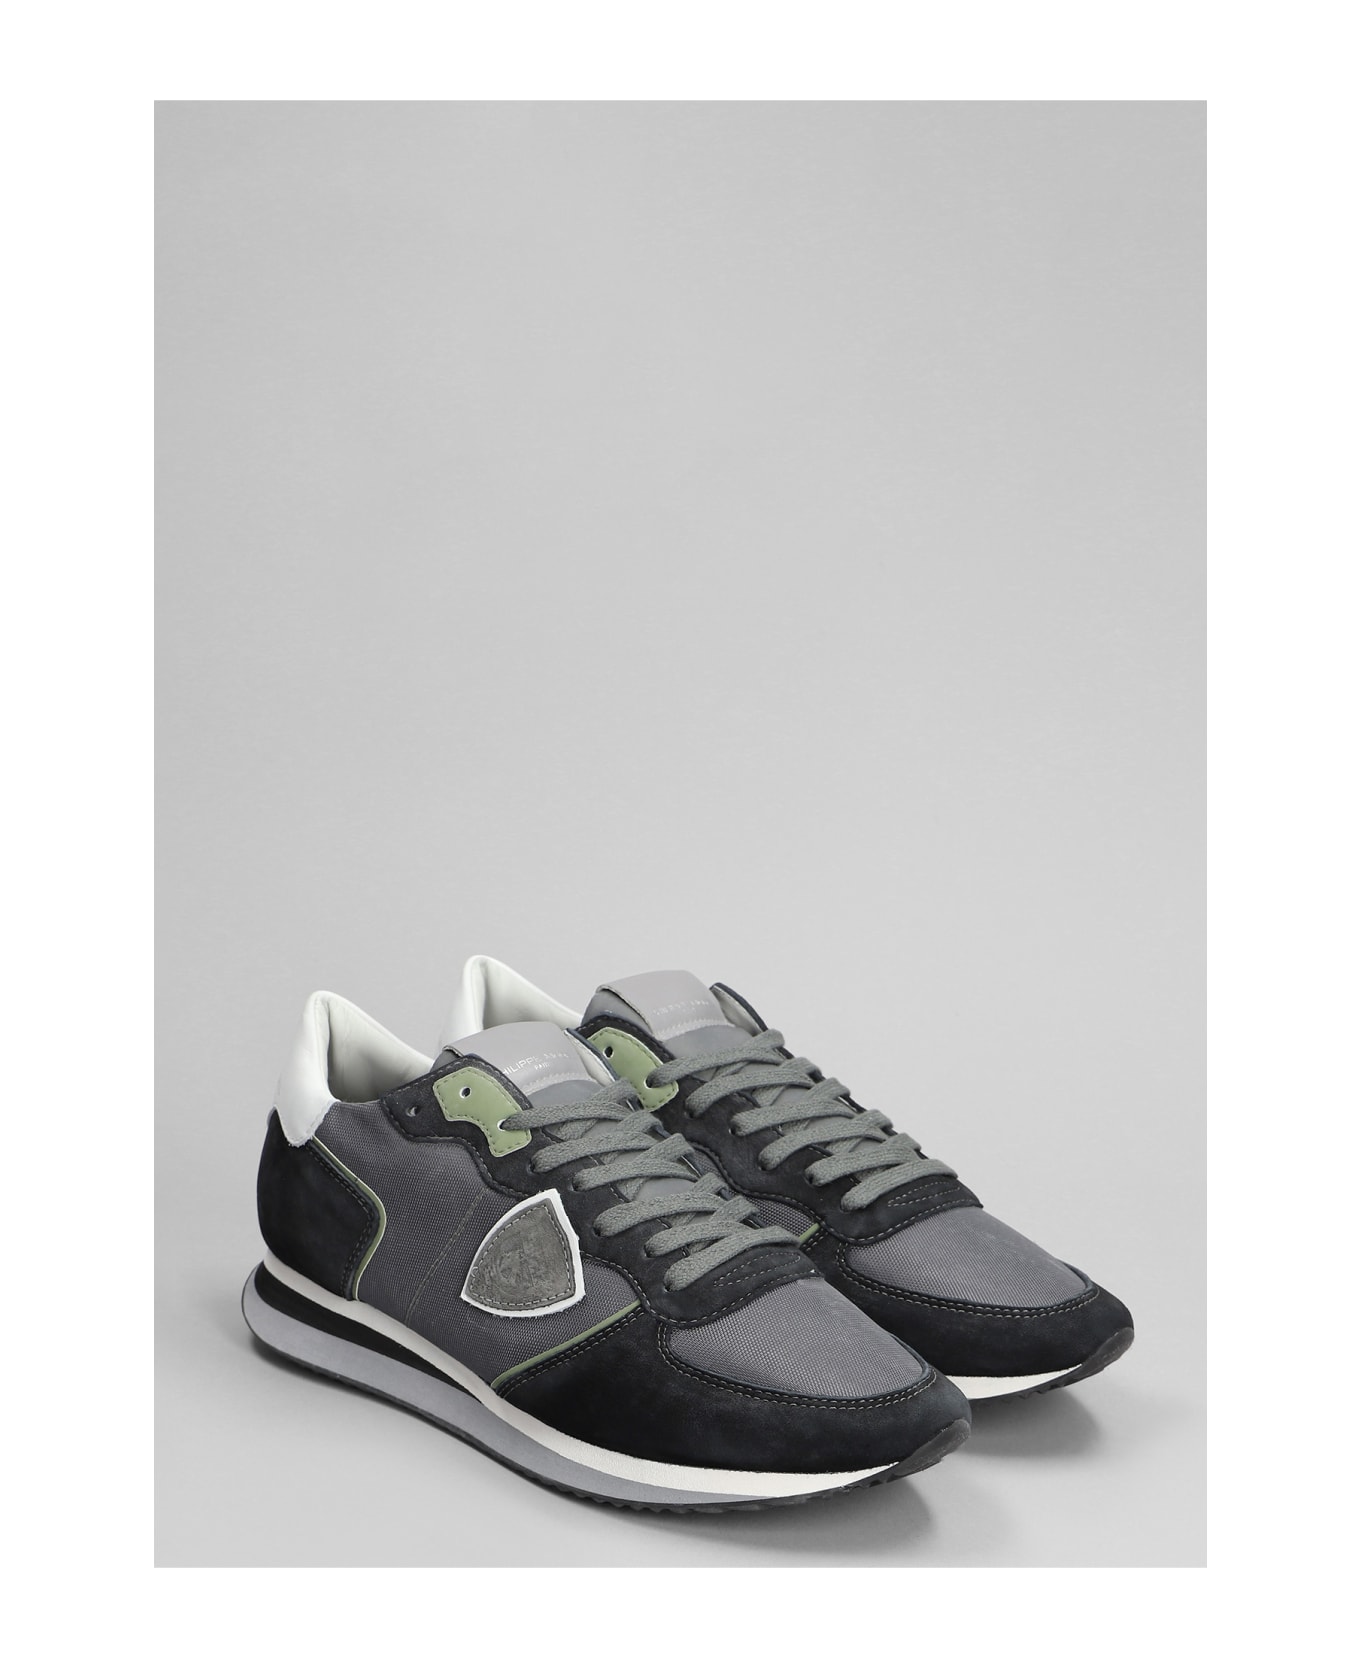 Philippe Model Trpx Low Sneakers In Grey Suede And Fabric - grey